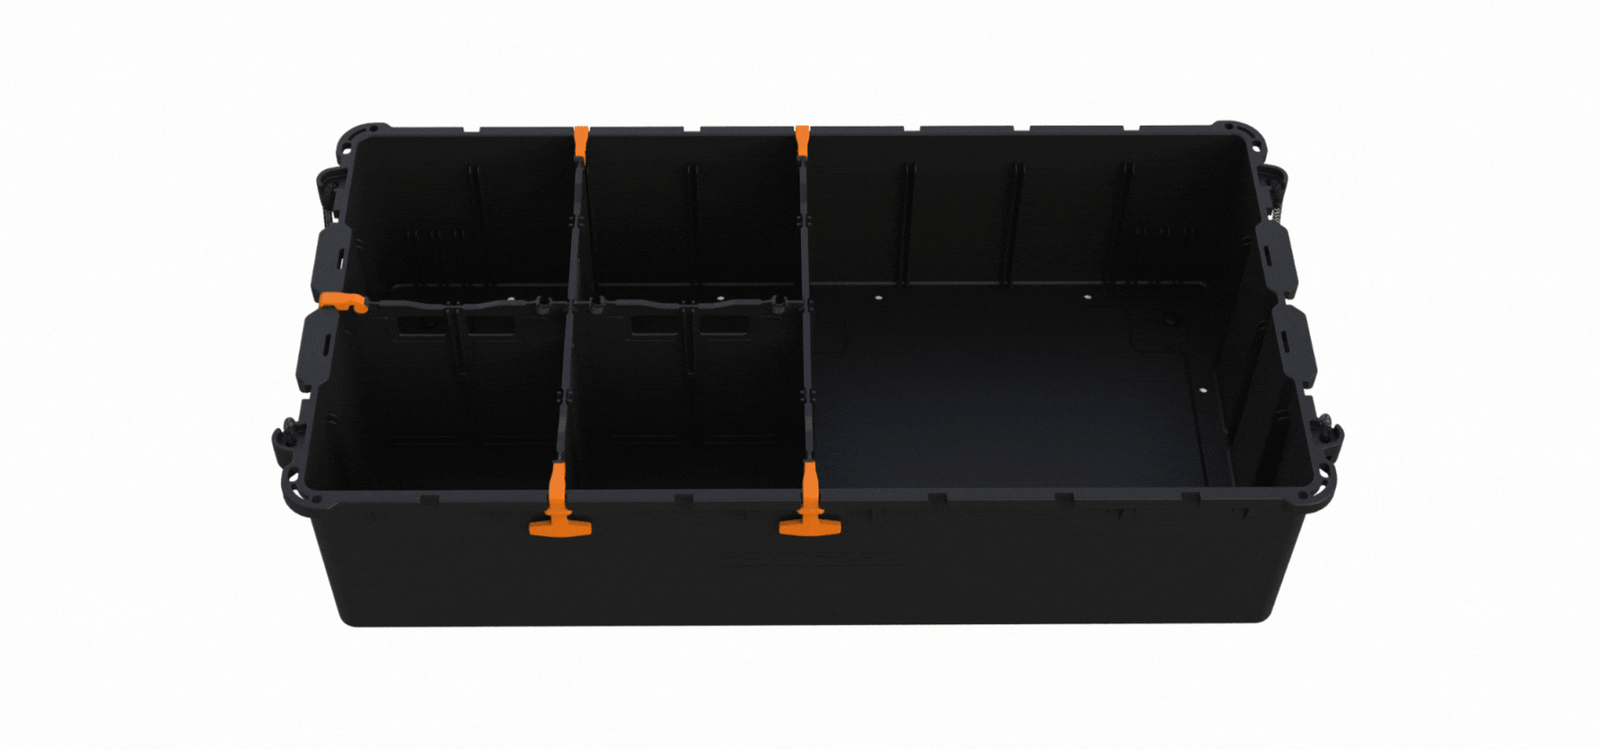 Rectangular Transport Storage Tubs With or Without Drains